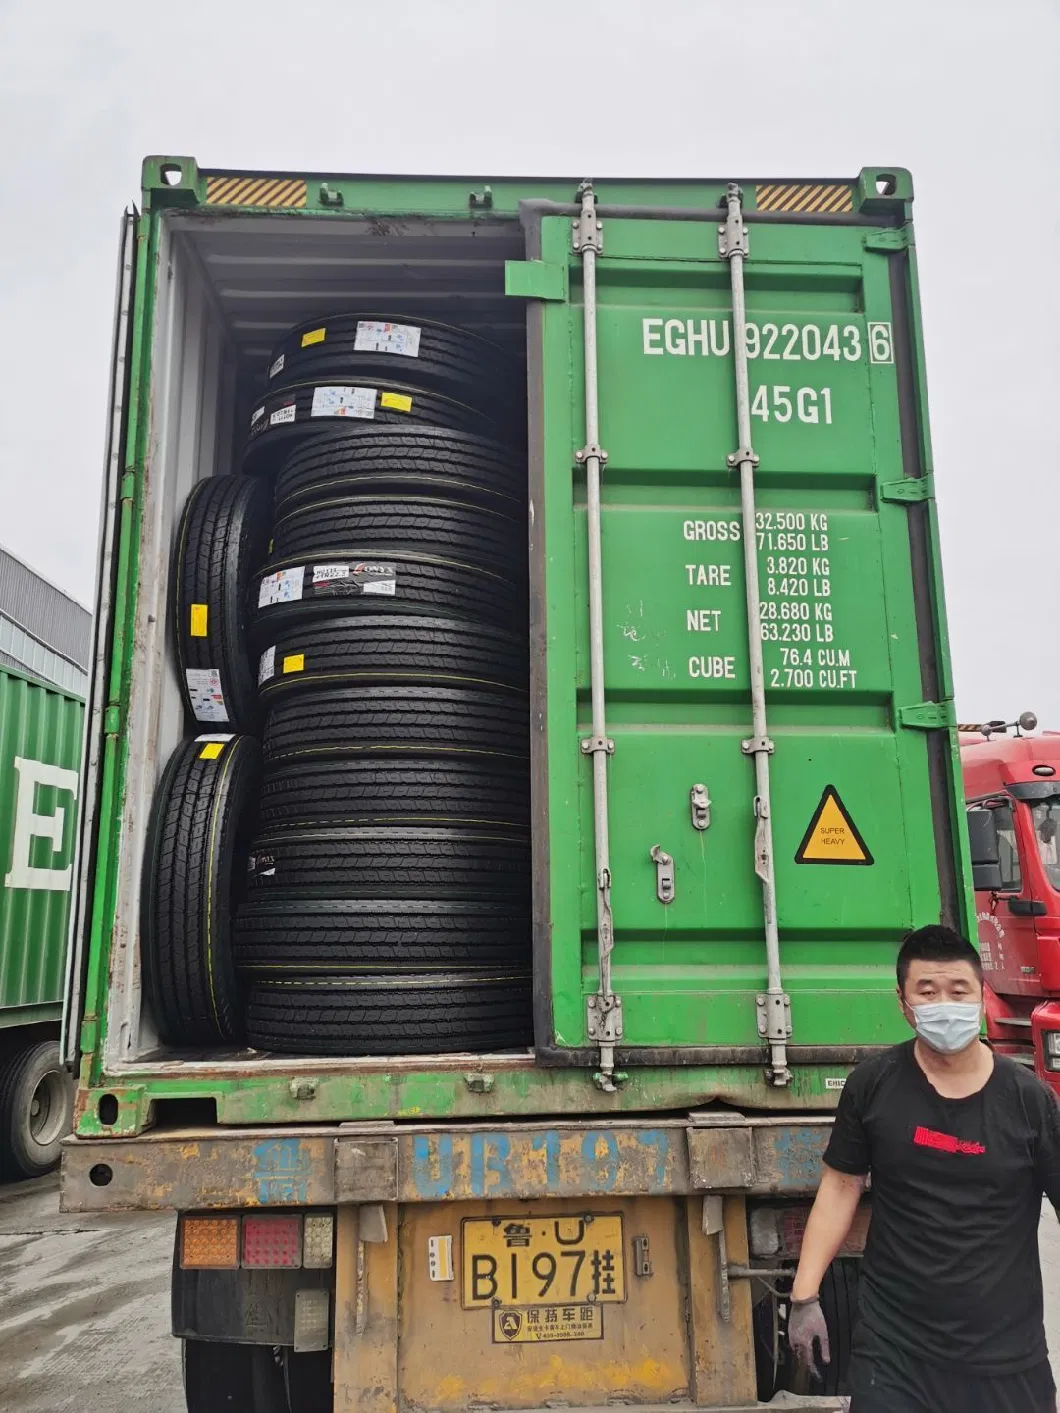 Onyx, Hifly, Deruibo, Ovation, Cachland Brand Chinese Truck Tyres